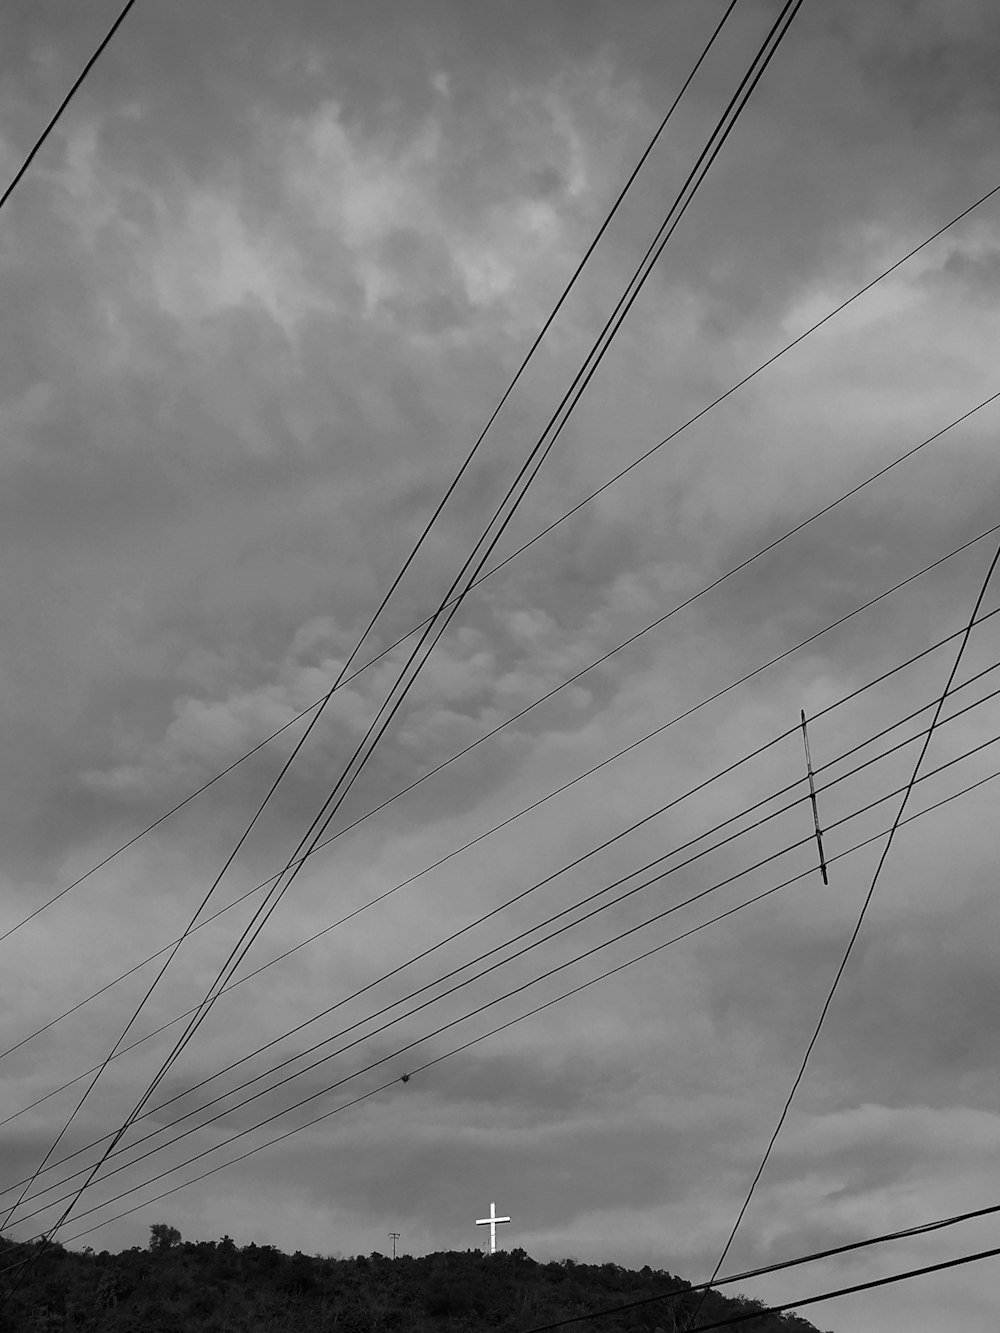 eleectric cables under cloudy sky